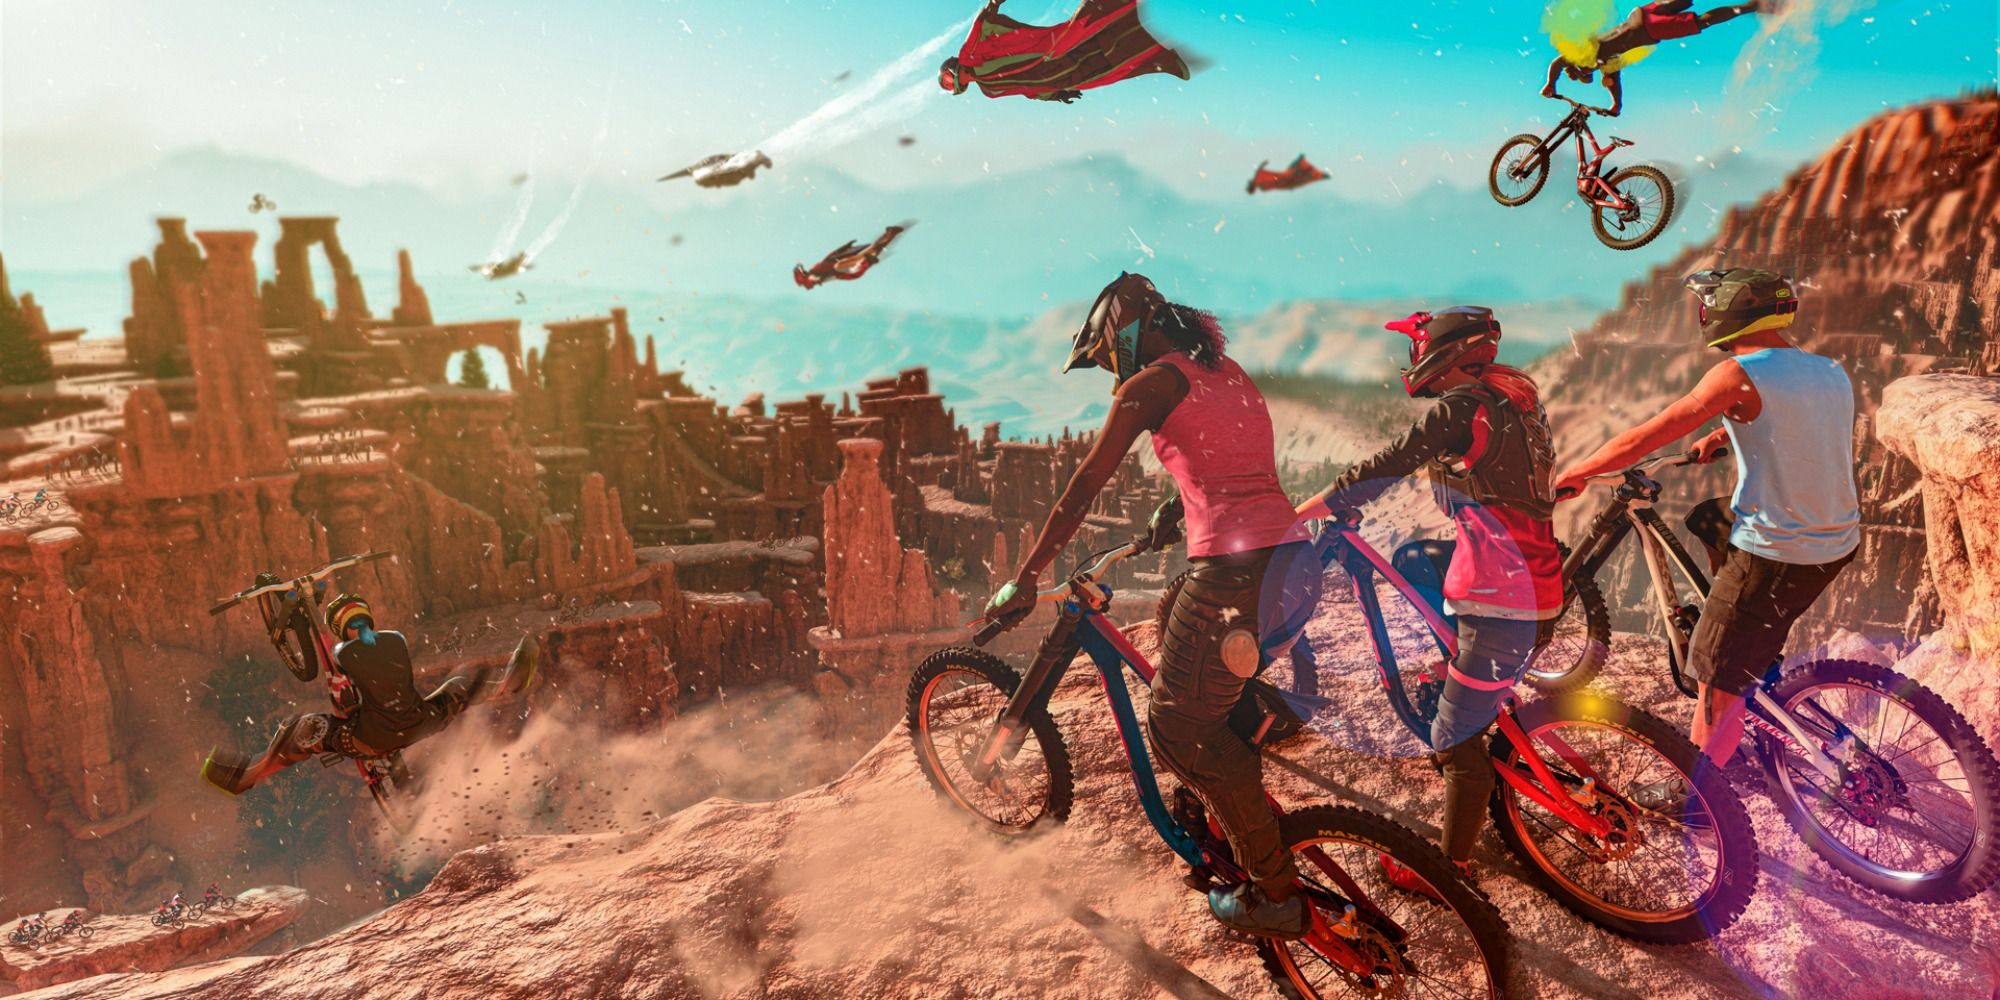 Shredders Games Riders Republic on bikes and wingsuits